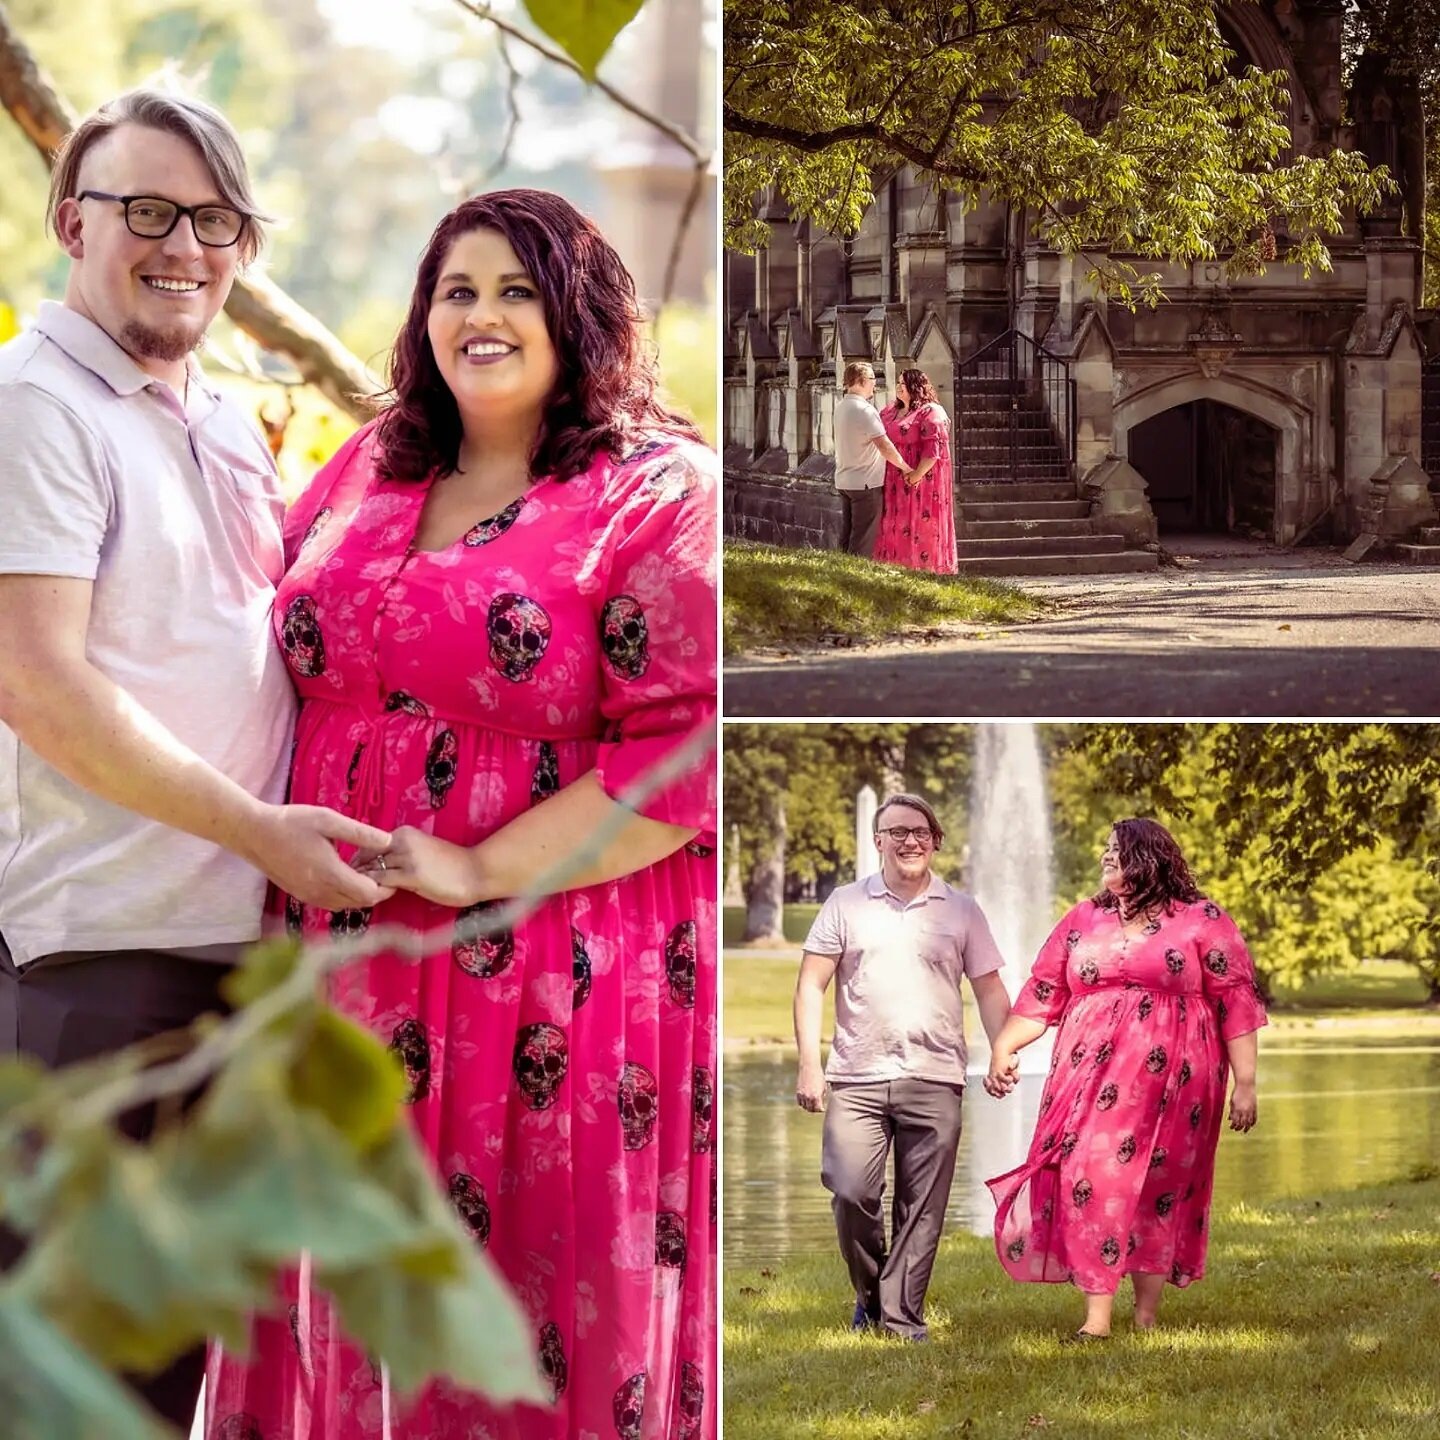 Congrats on your engagement @mirnduhh ! I had such a great time ❤
.
.
#photography #cincinnati #springgrovecemetery